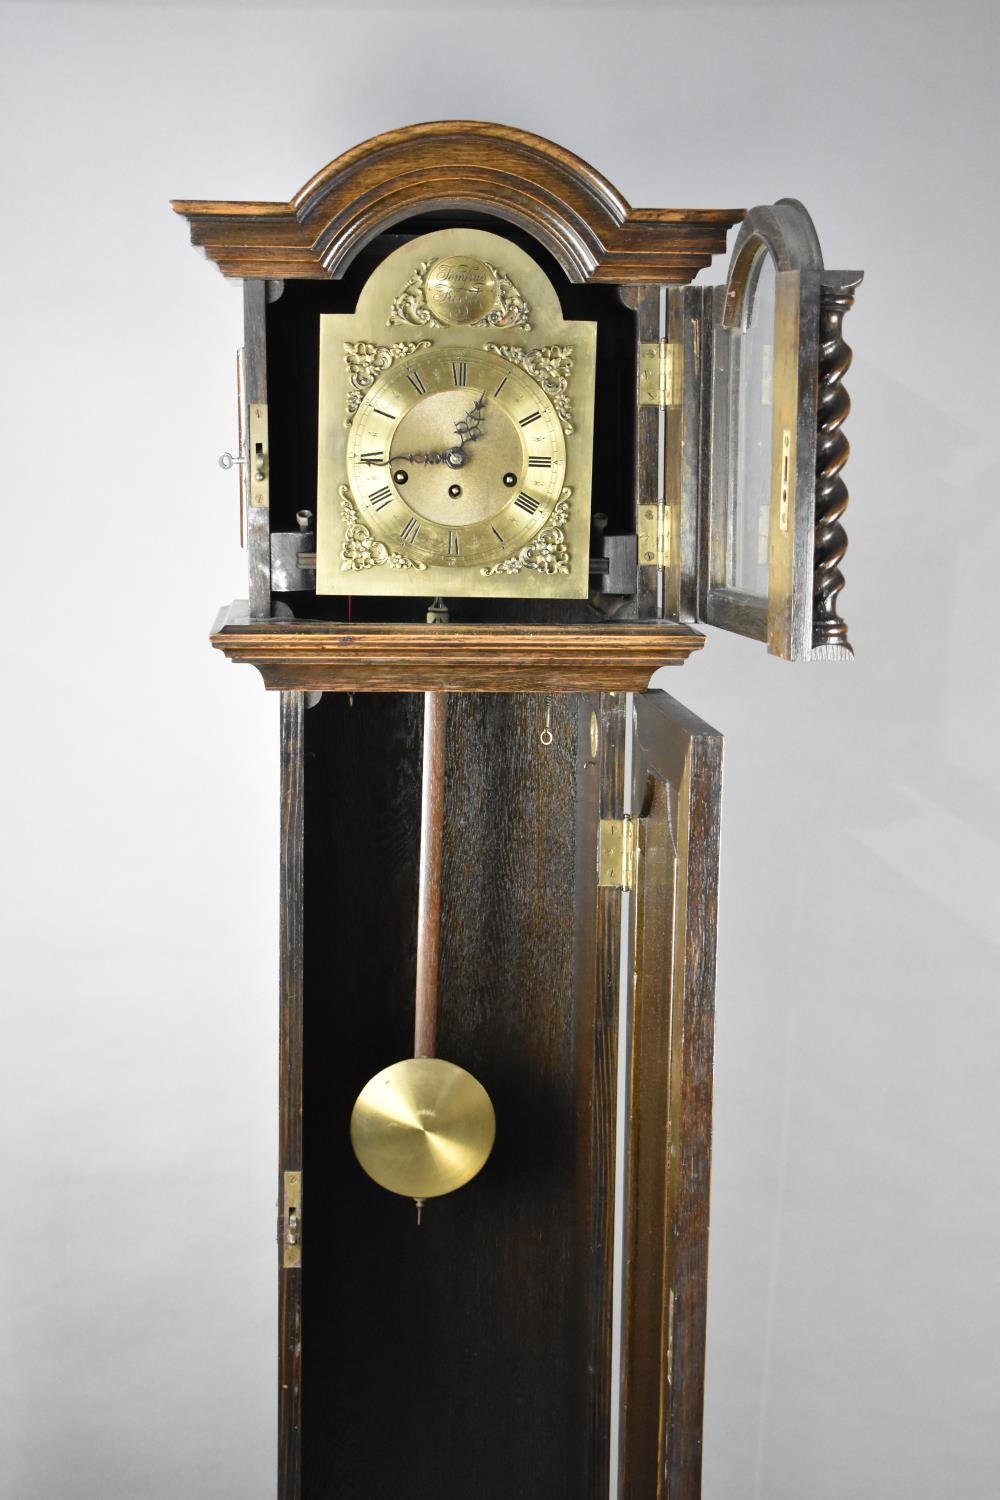 A Mid 20th Century Oak Grandmother Clock with Brass Tempus Fugit Arched Dial, Westminster Chime - Image 3 of 3